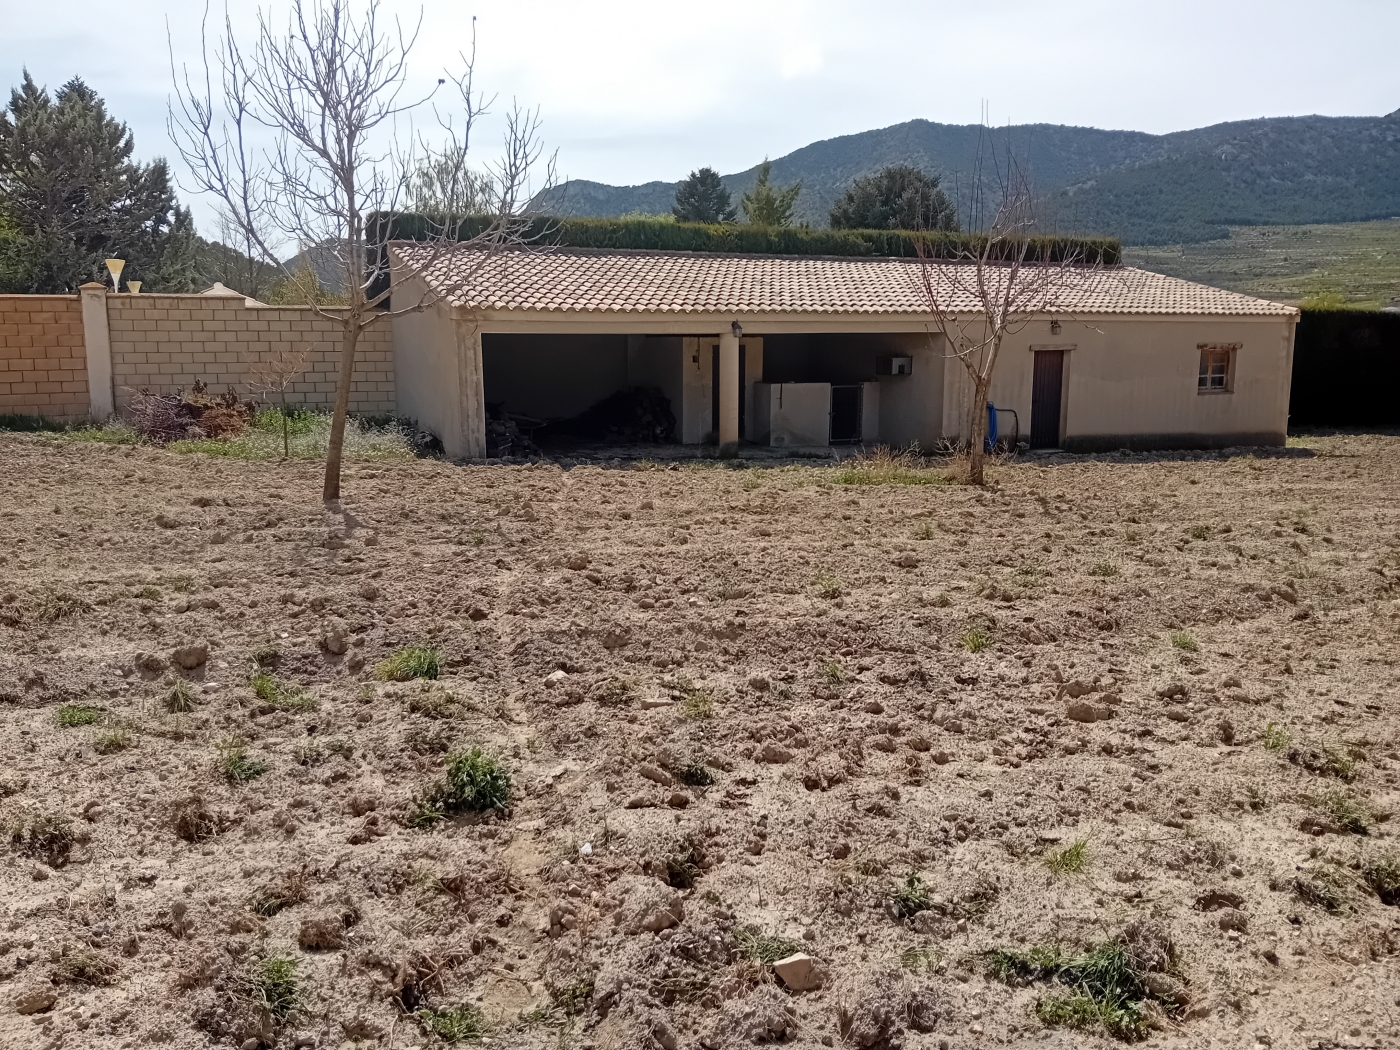 ES173630: Commercial Property  in Huescar